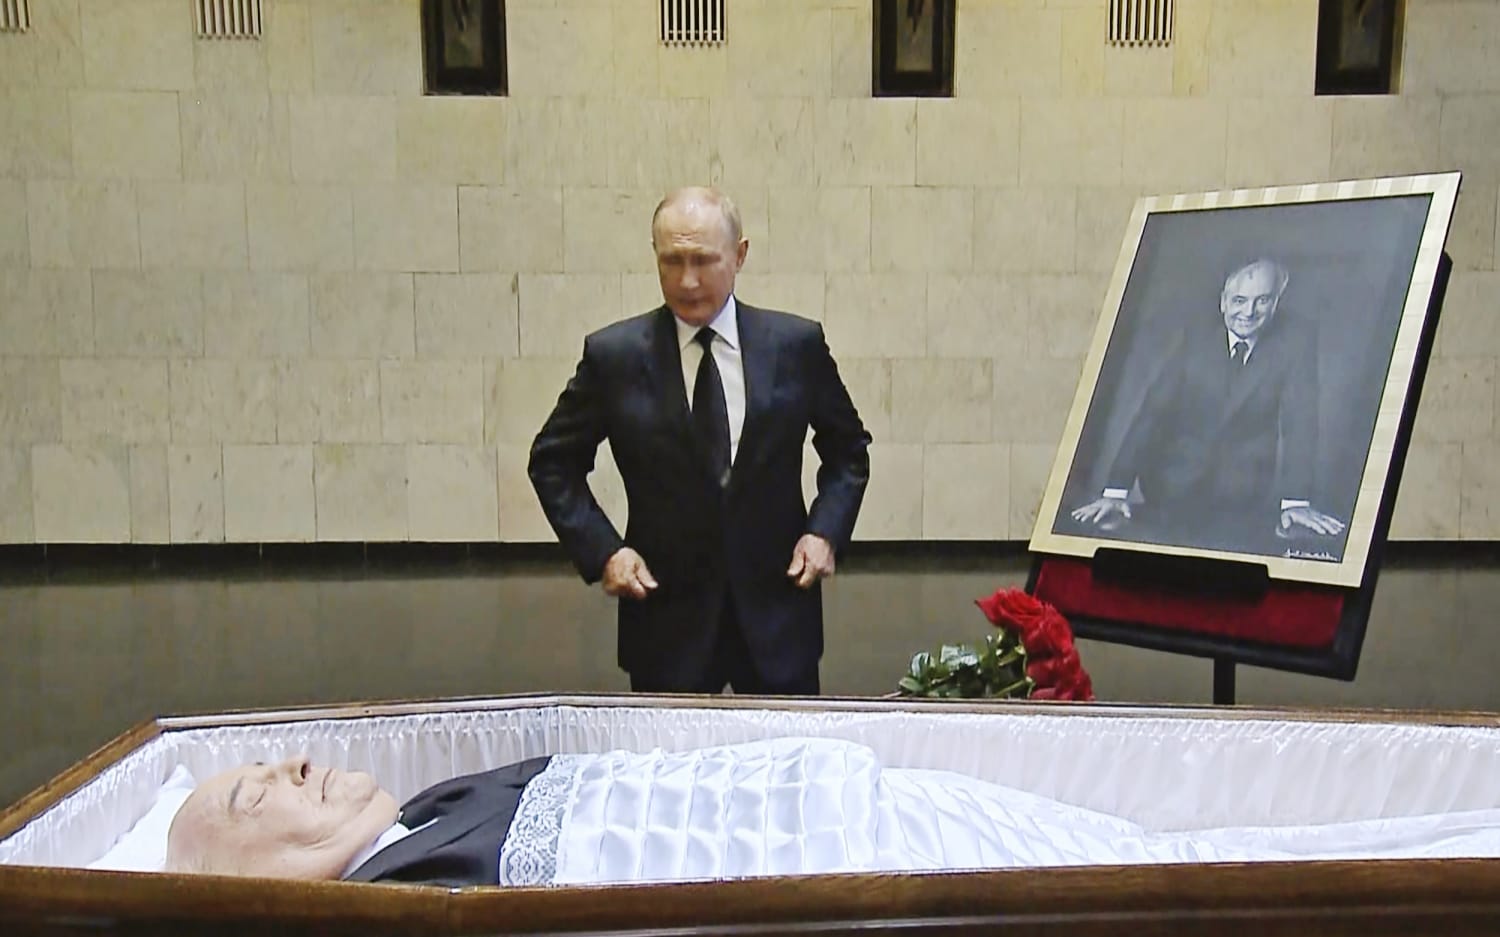 Putin won’t attend Gorbachev’s funeral because of scheduling constraints